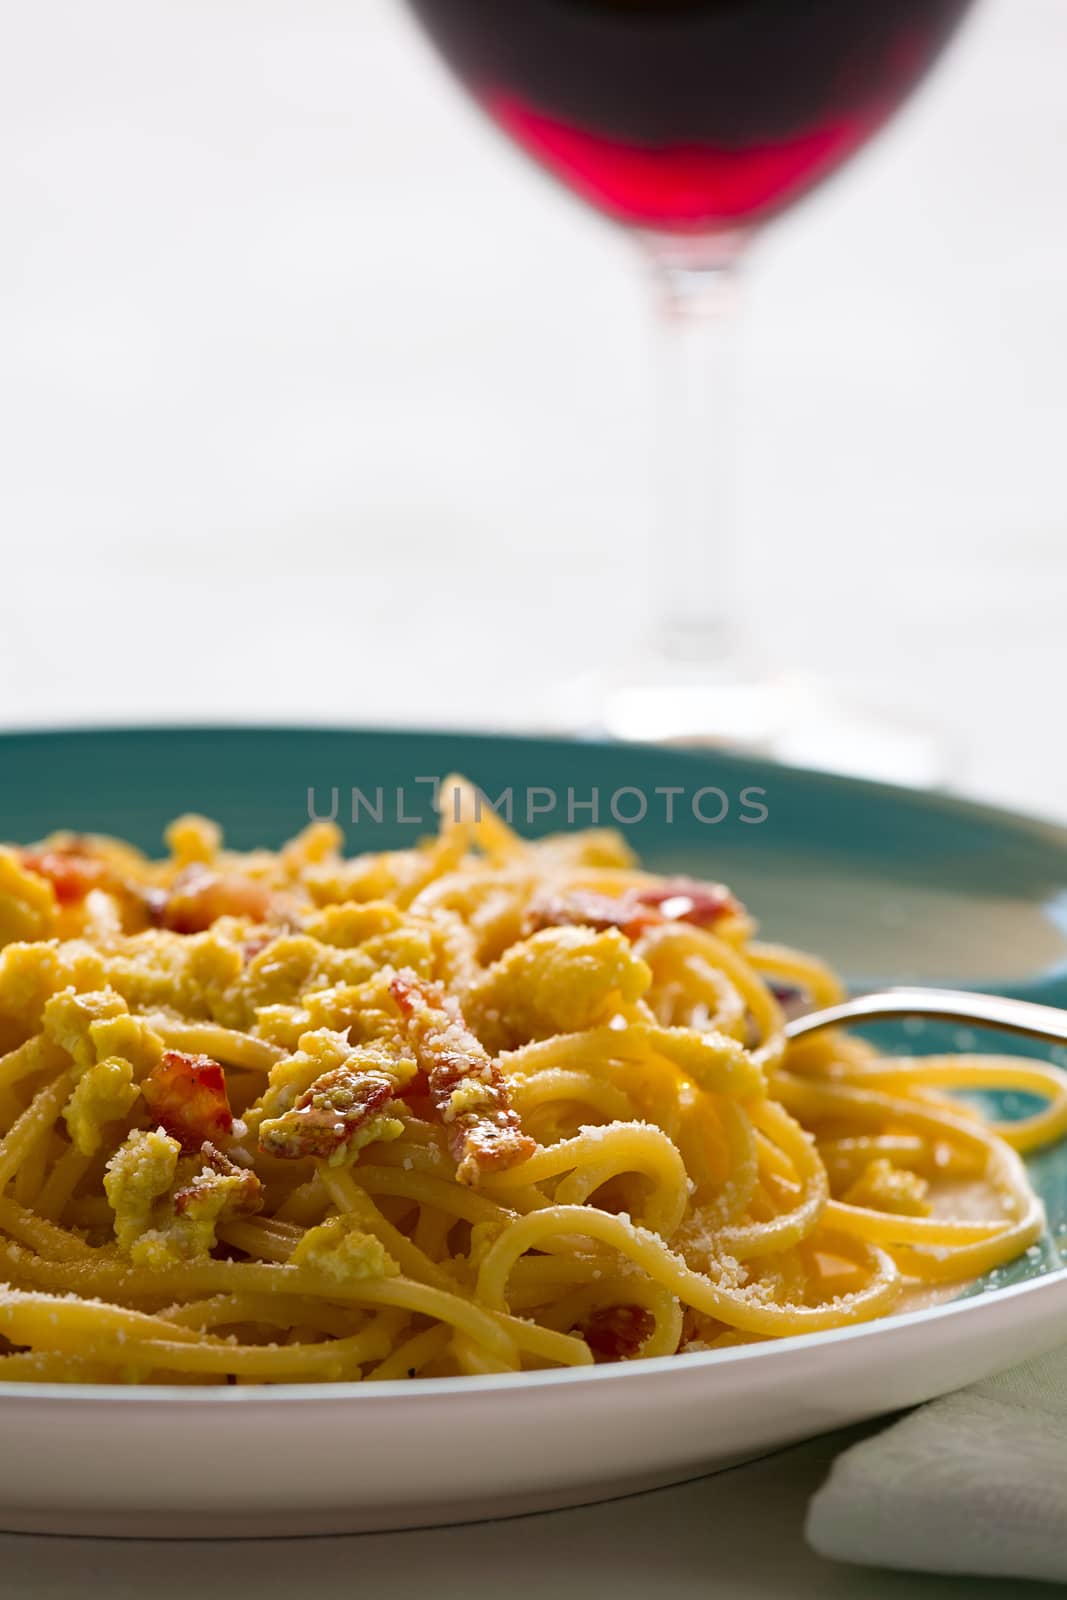 Closeup of spaghetti carbonara with egg, smoked bacon and cheese over a table with a red wine glass